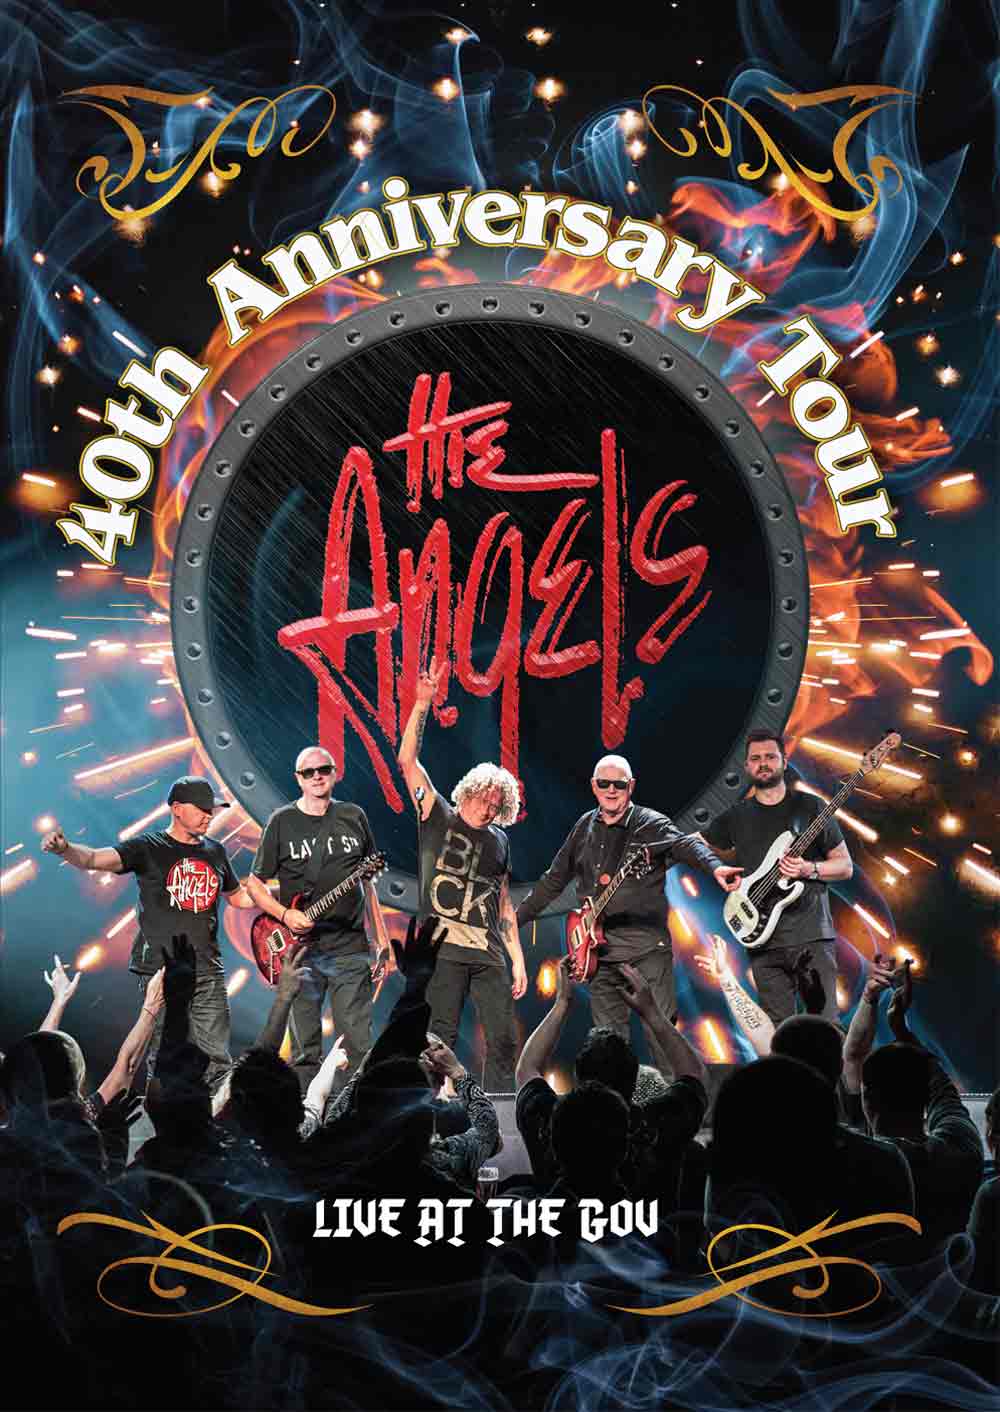 40th Anniversary Tour – DVD <br/> Live At The Gov <br/>The Angels